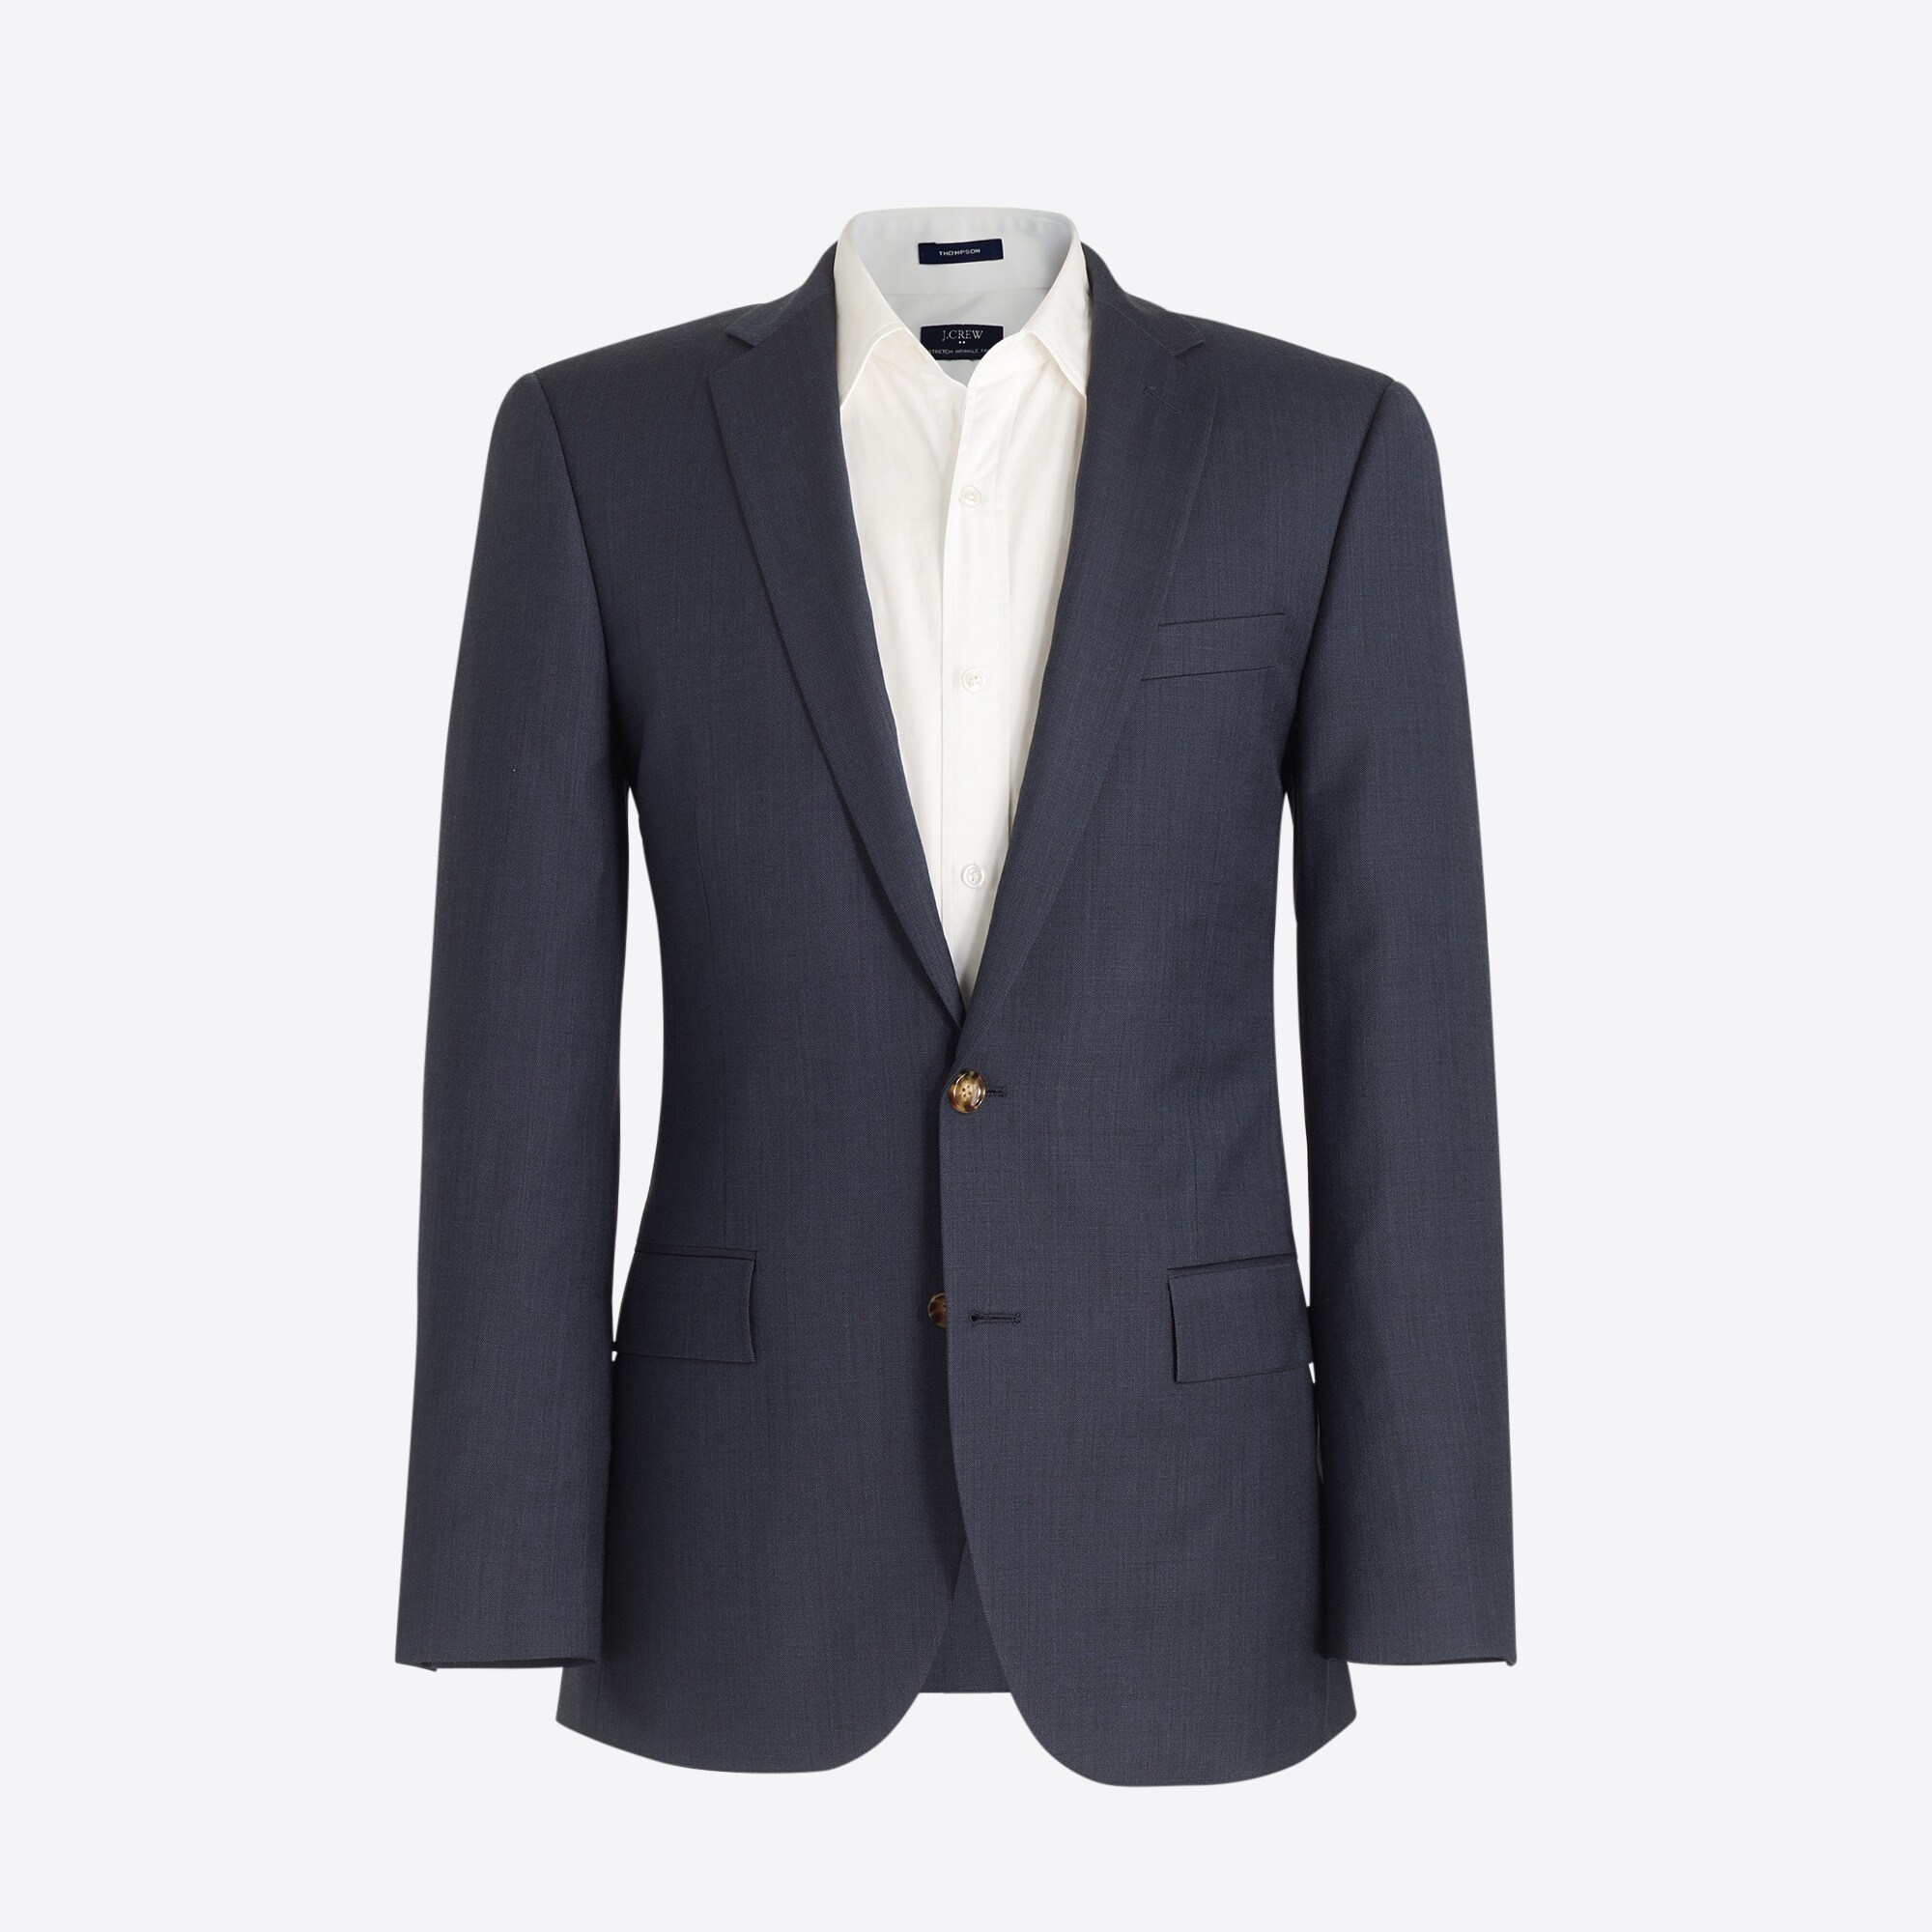  Thompson suit jacket in worsted wool